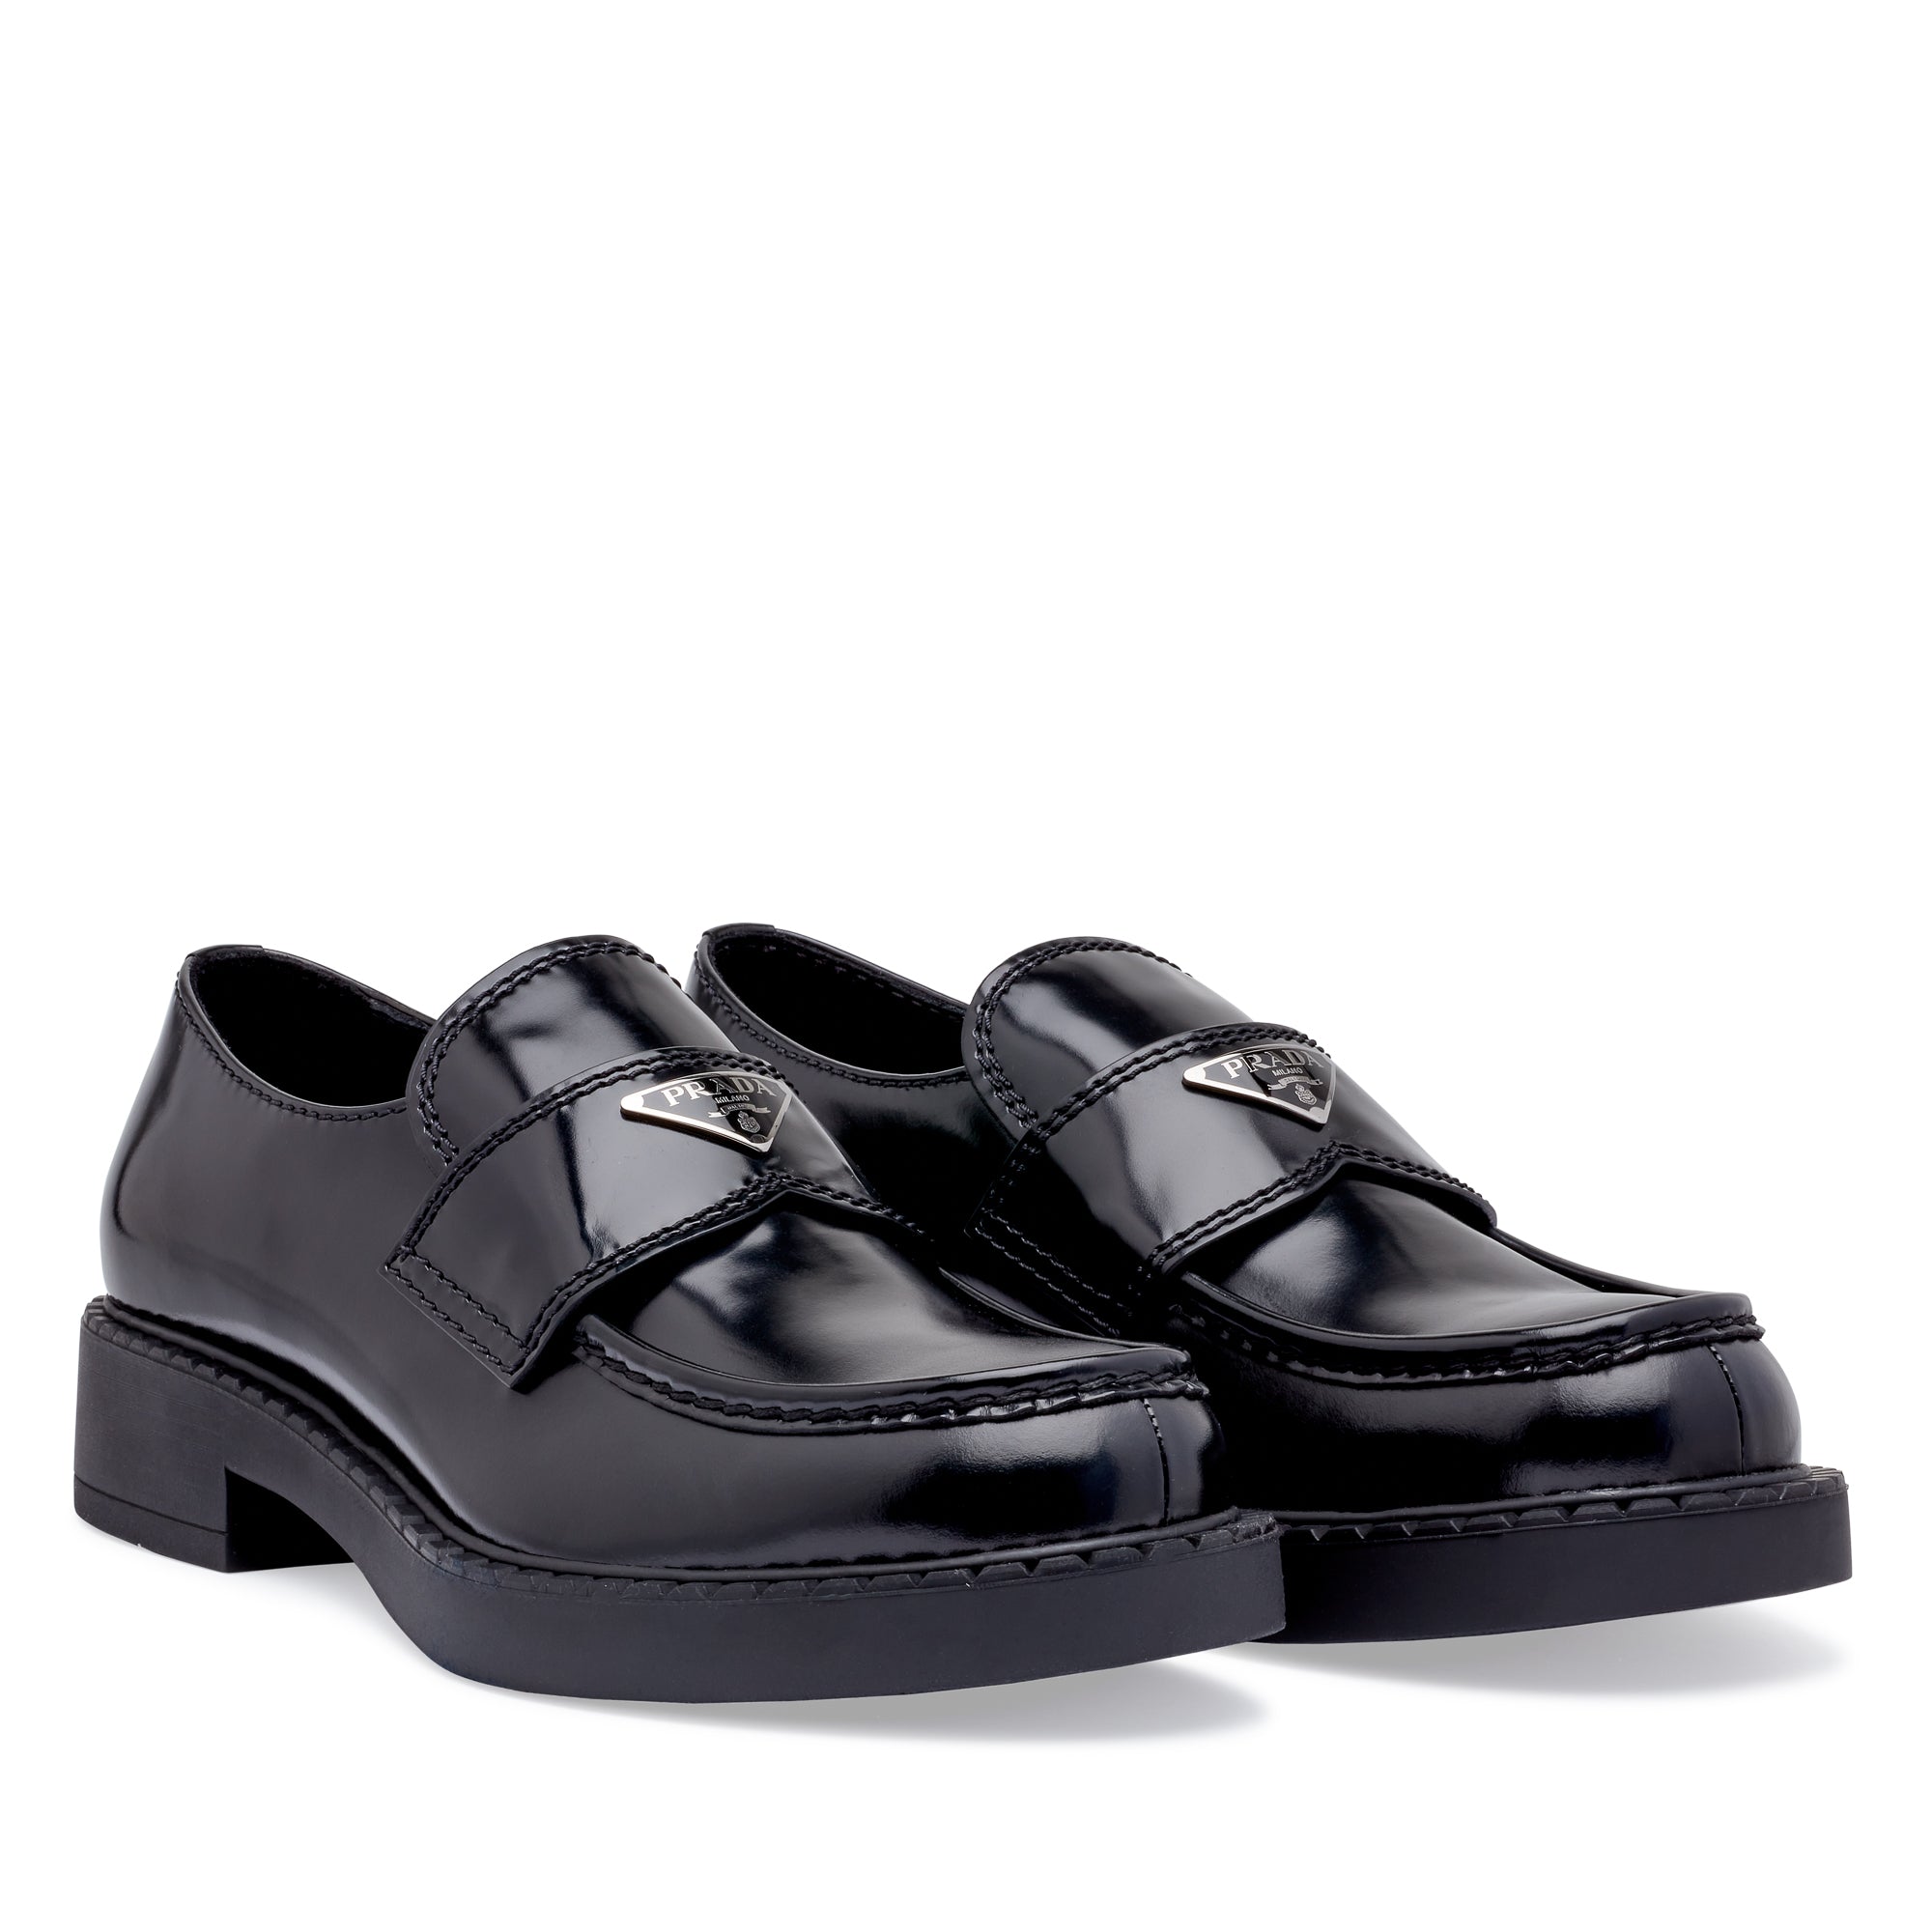 Prada - Men's Brushed Leather Loafers - (Black) view 3